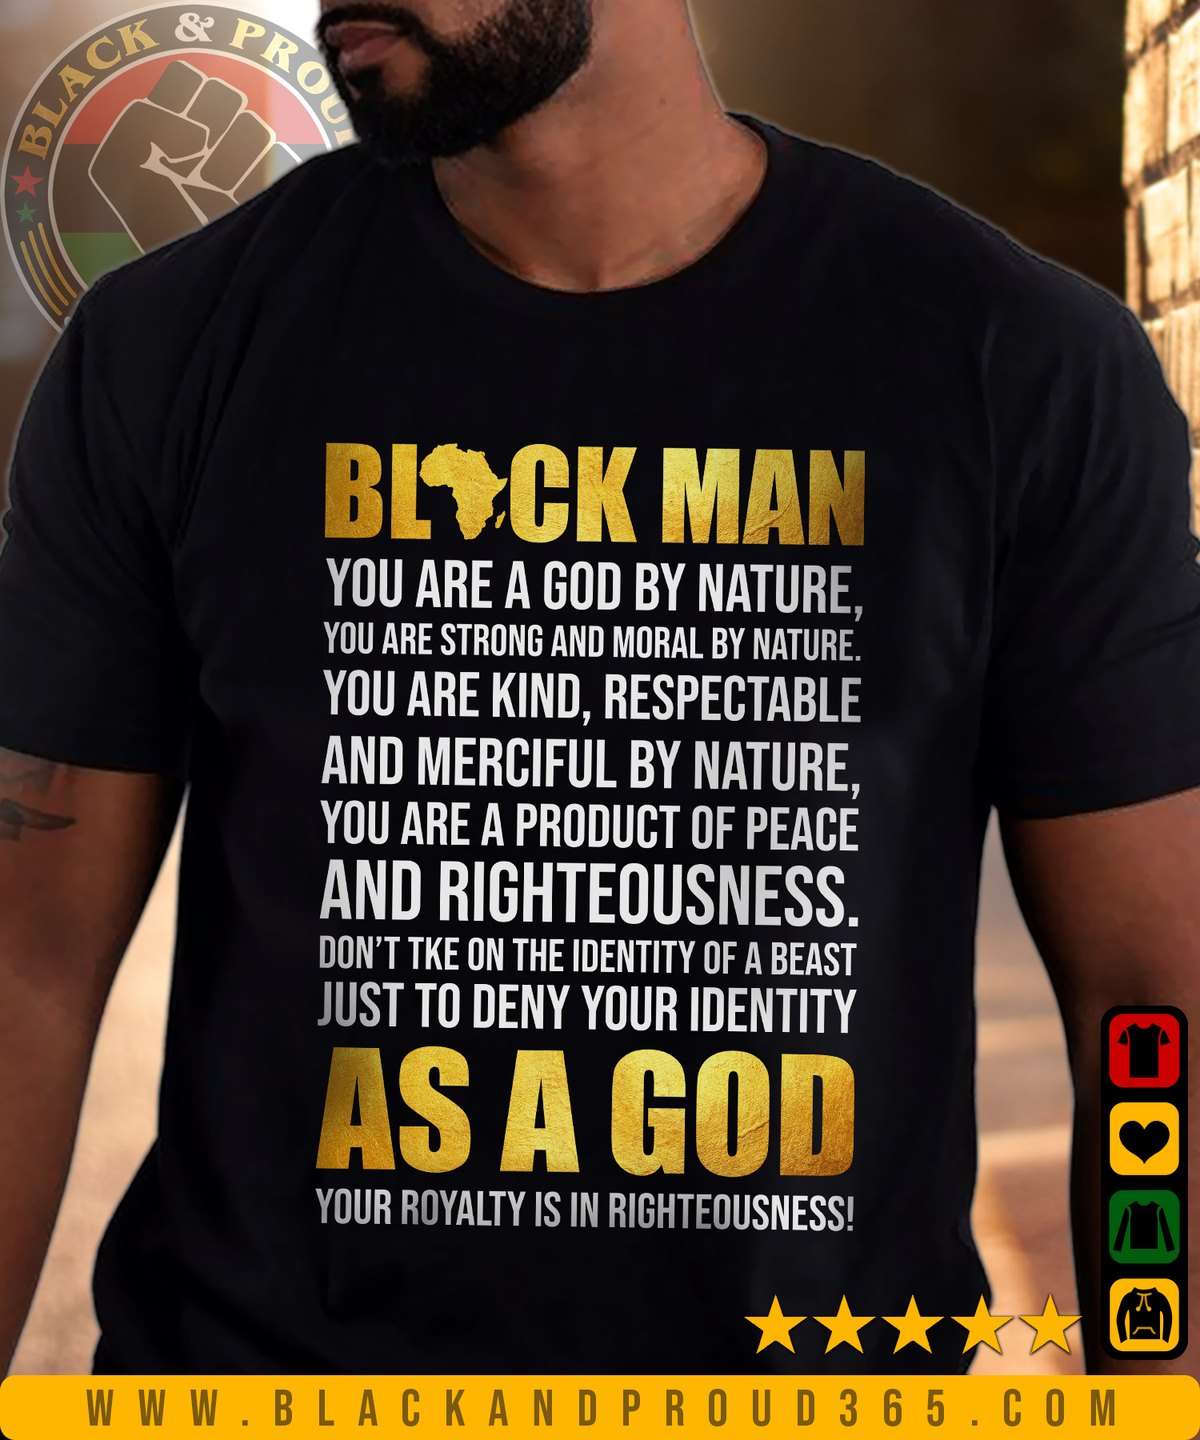 Black man - God by nature, strong and normal, black man as god, gift for black community